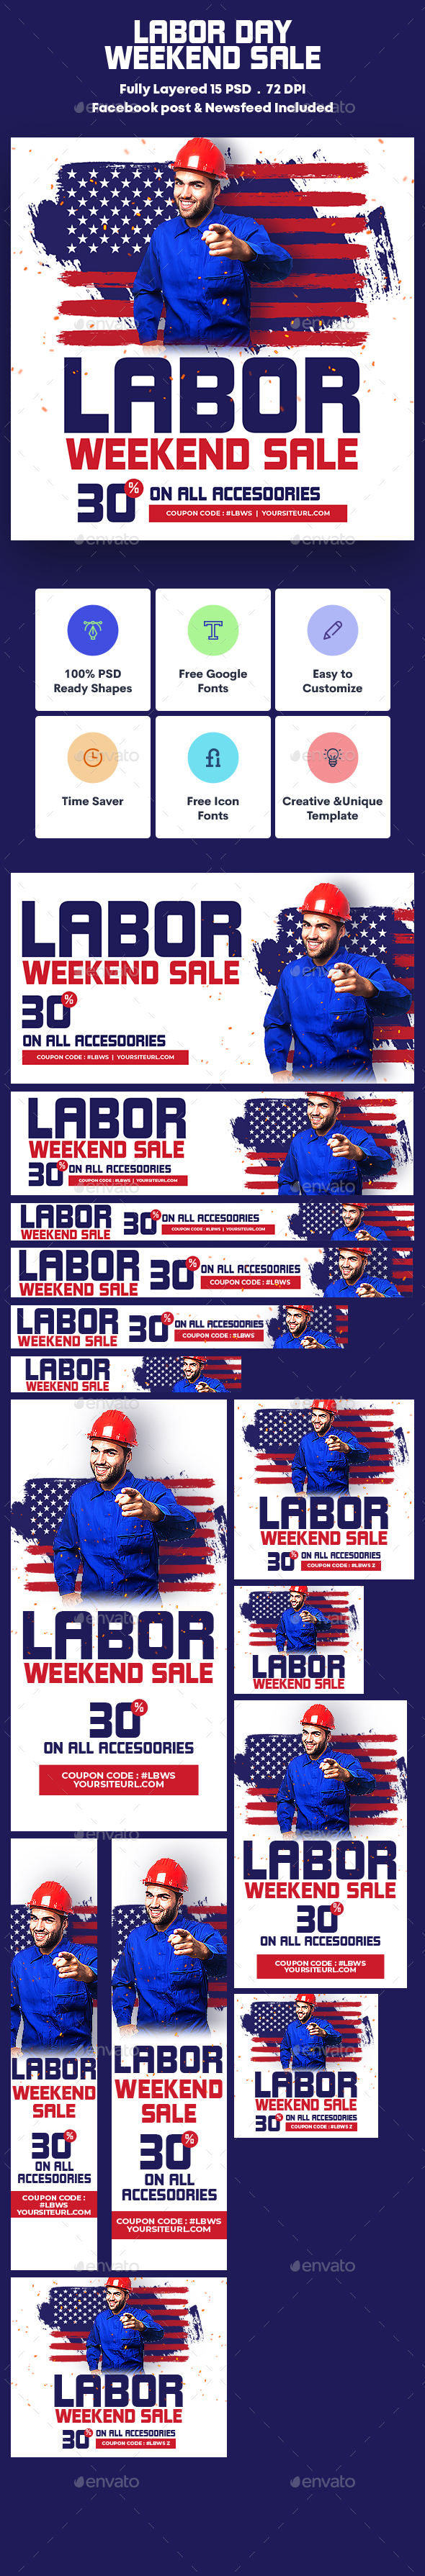 [DOWNLOAD]Labor Day Weekend Sale Banners Ad